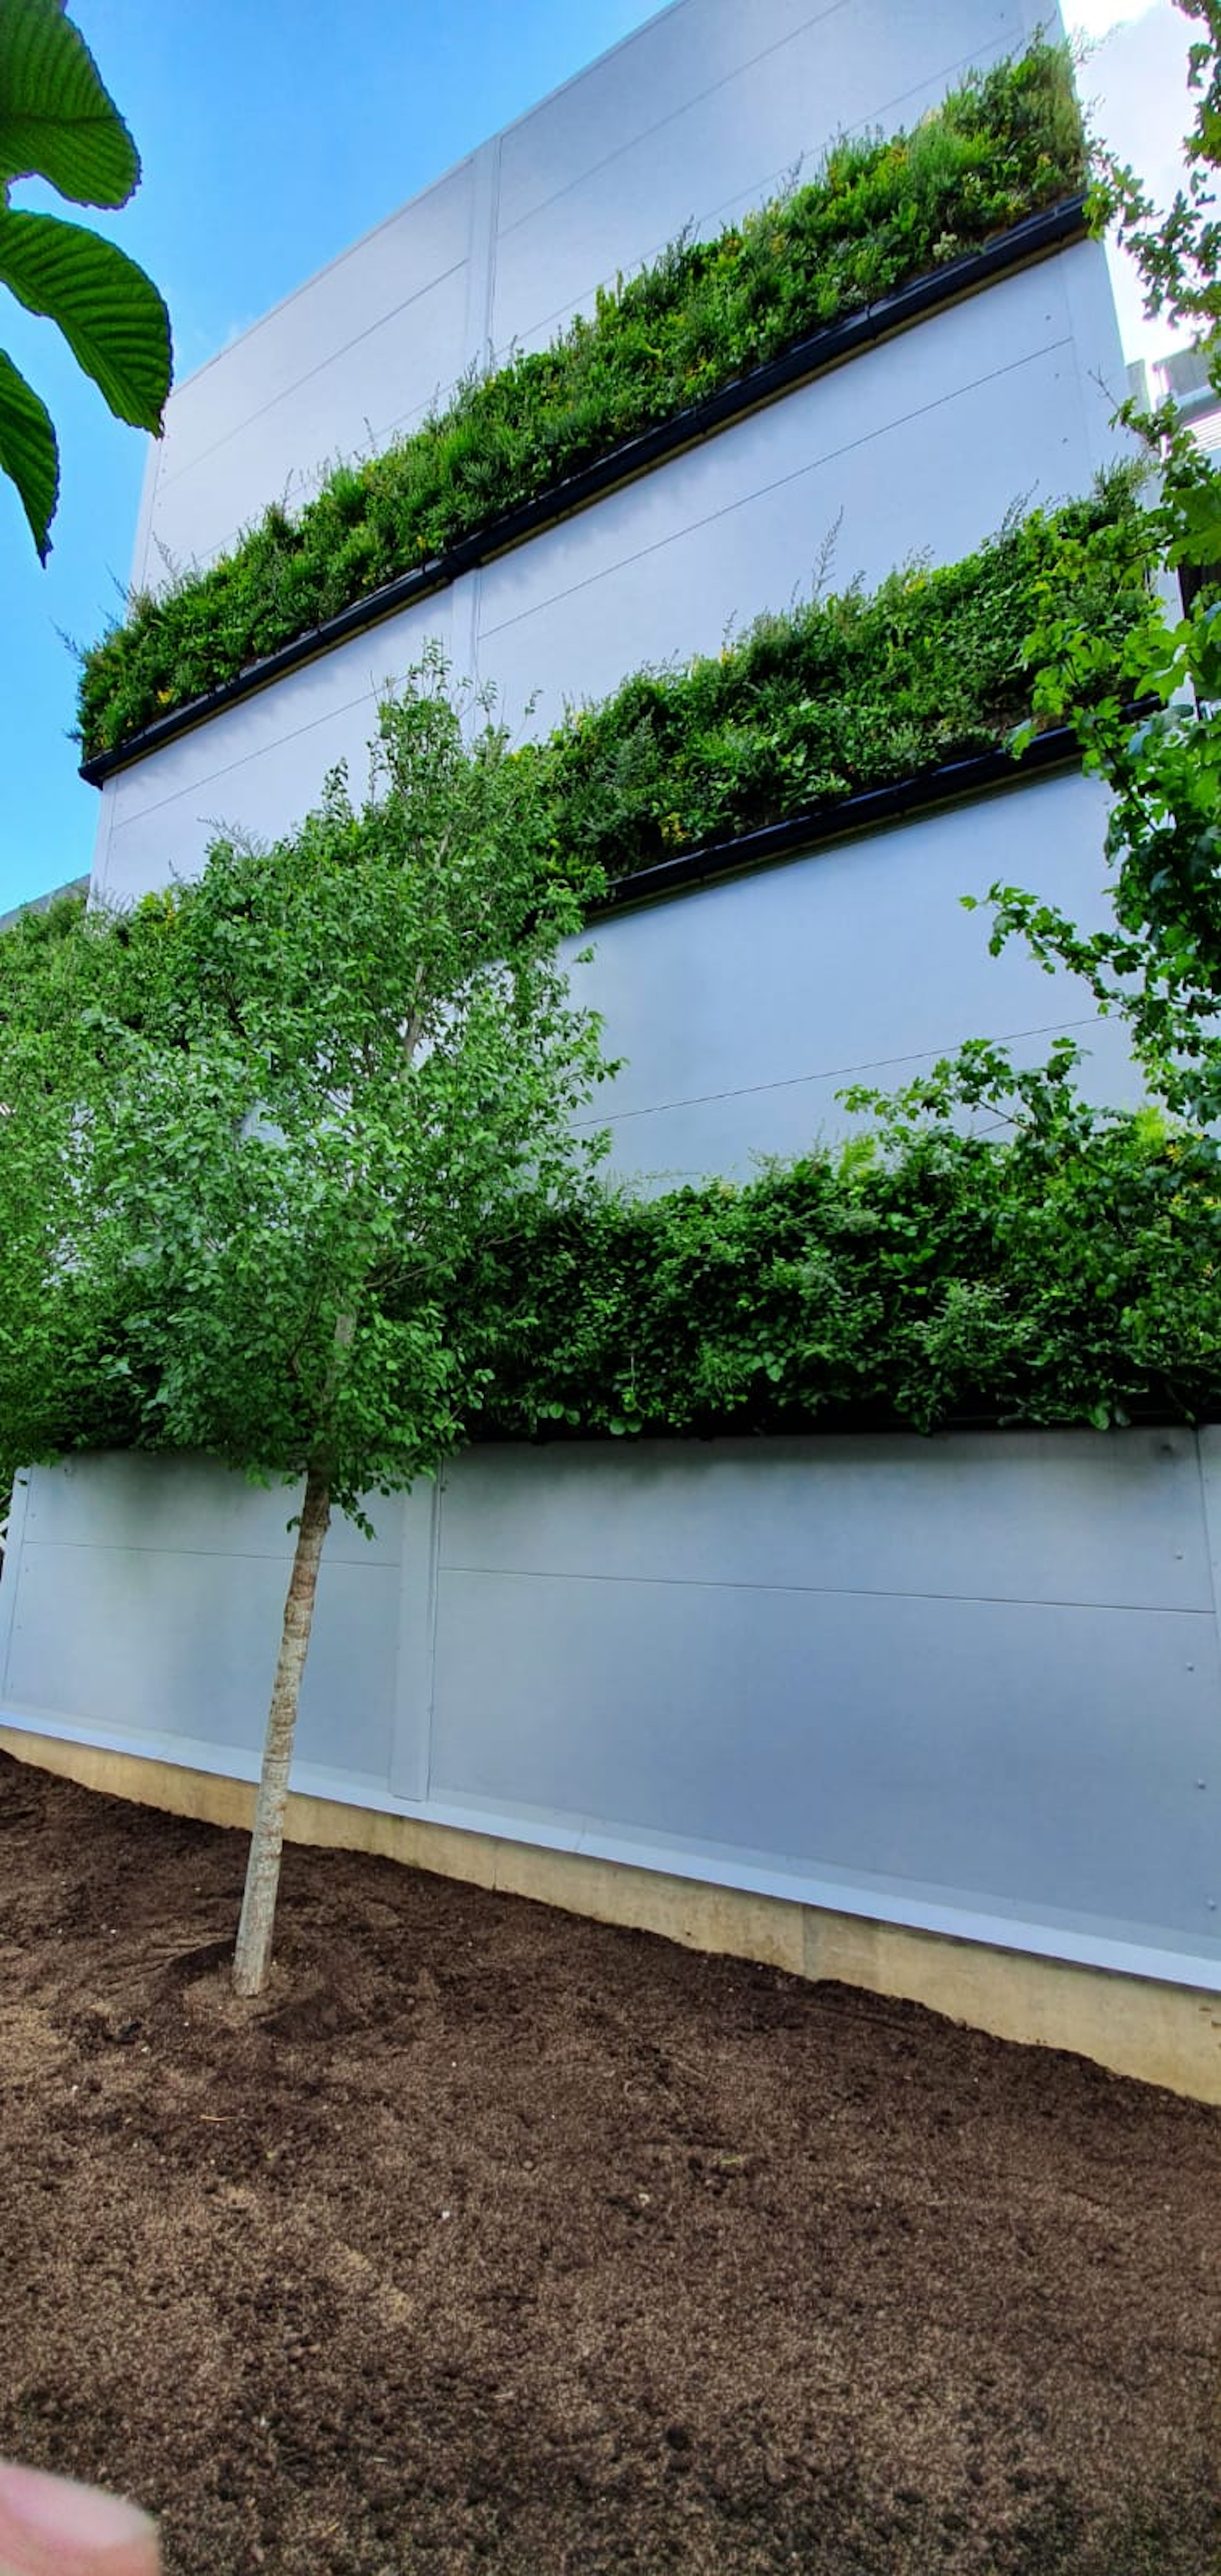 Bedfont car park Living Wall with trees